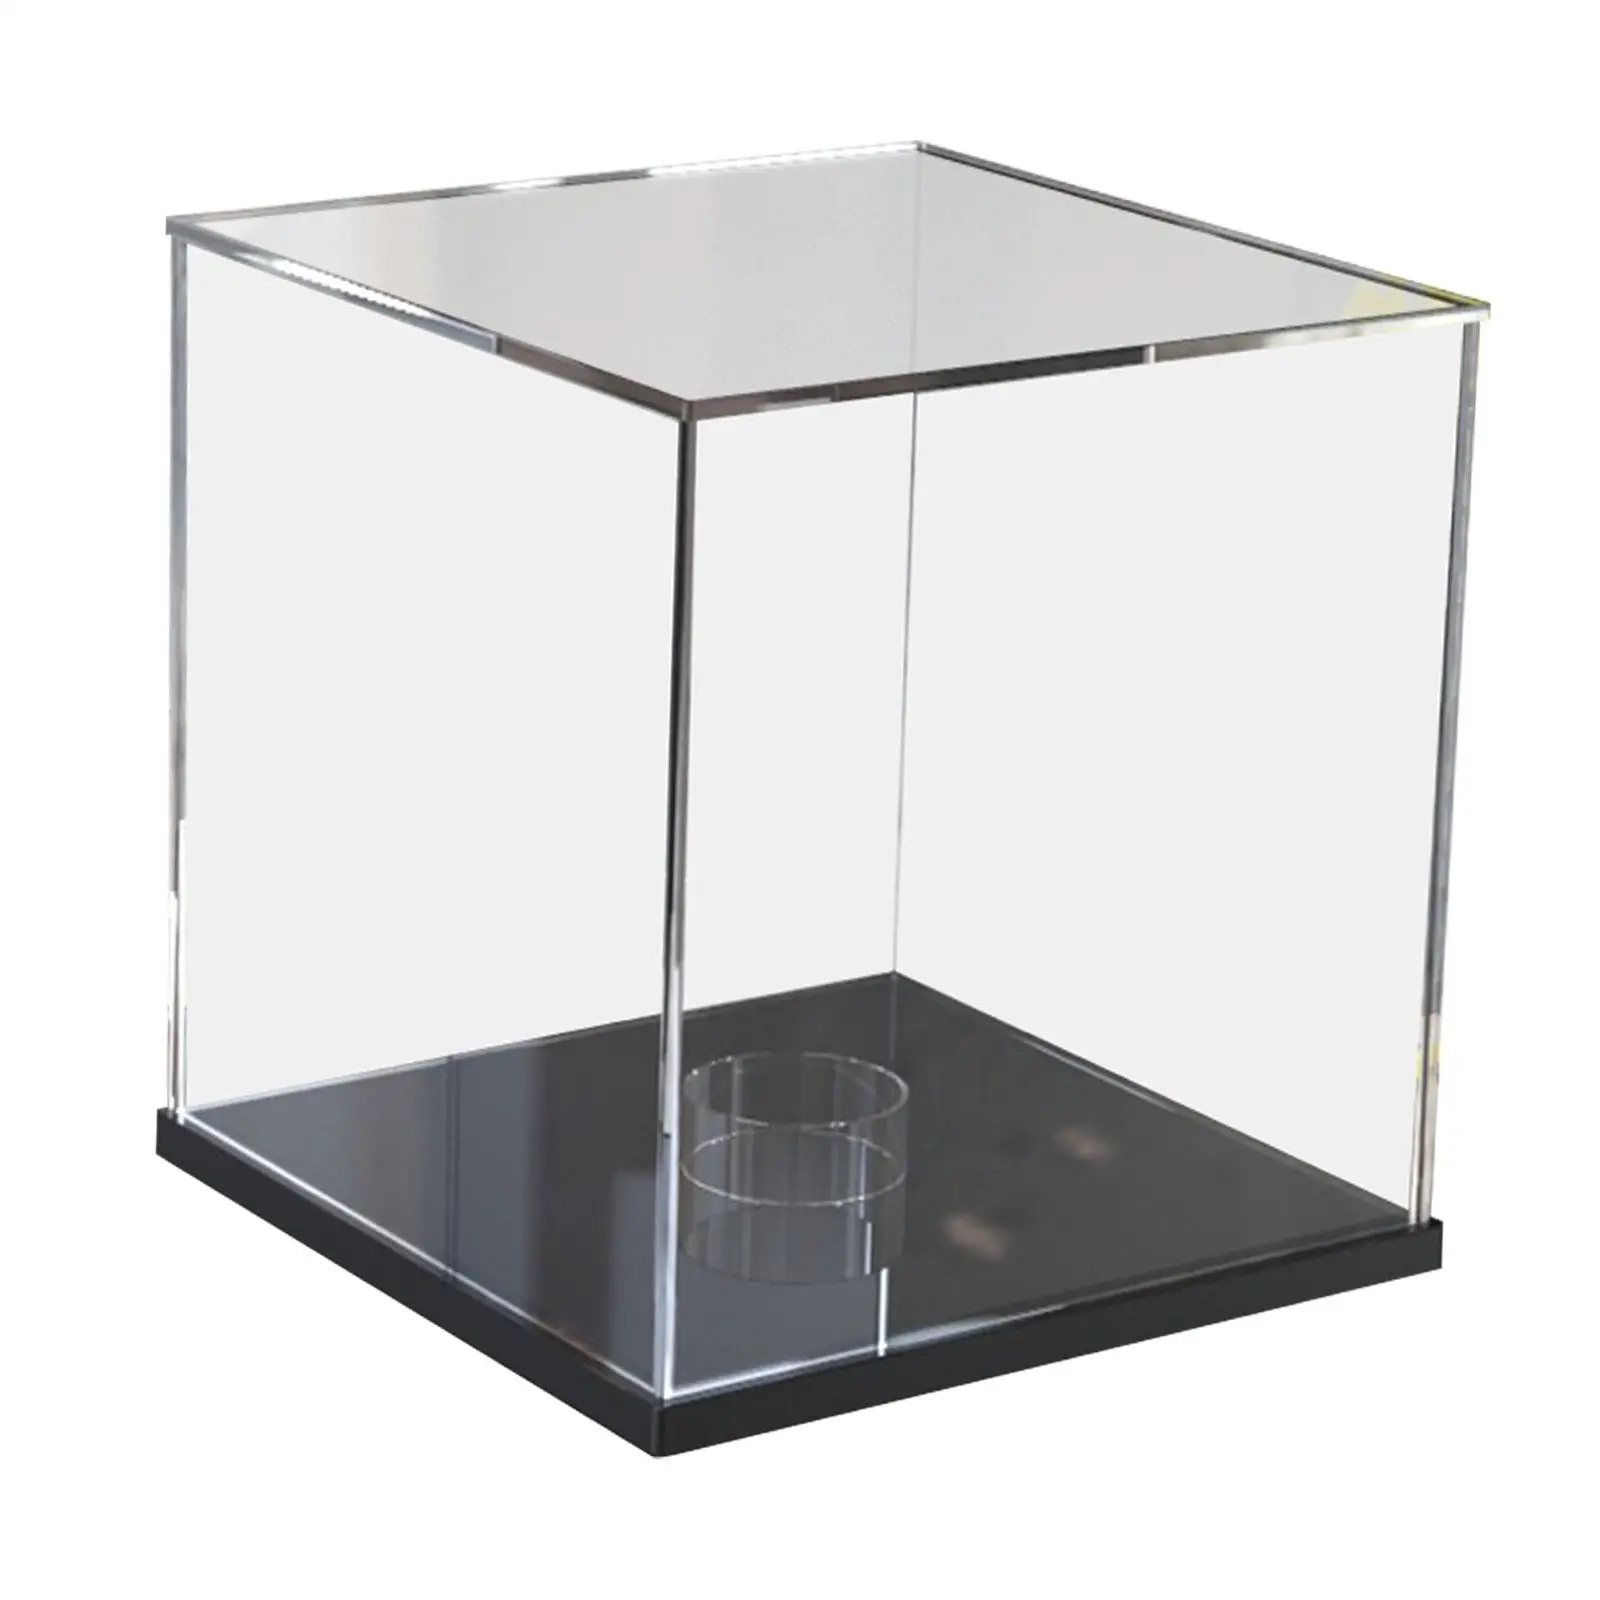 Basketball Display Case with Stand, Clear Acrylic Full Size Basketball Display